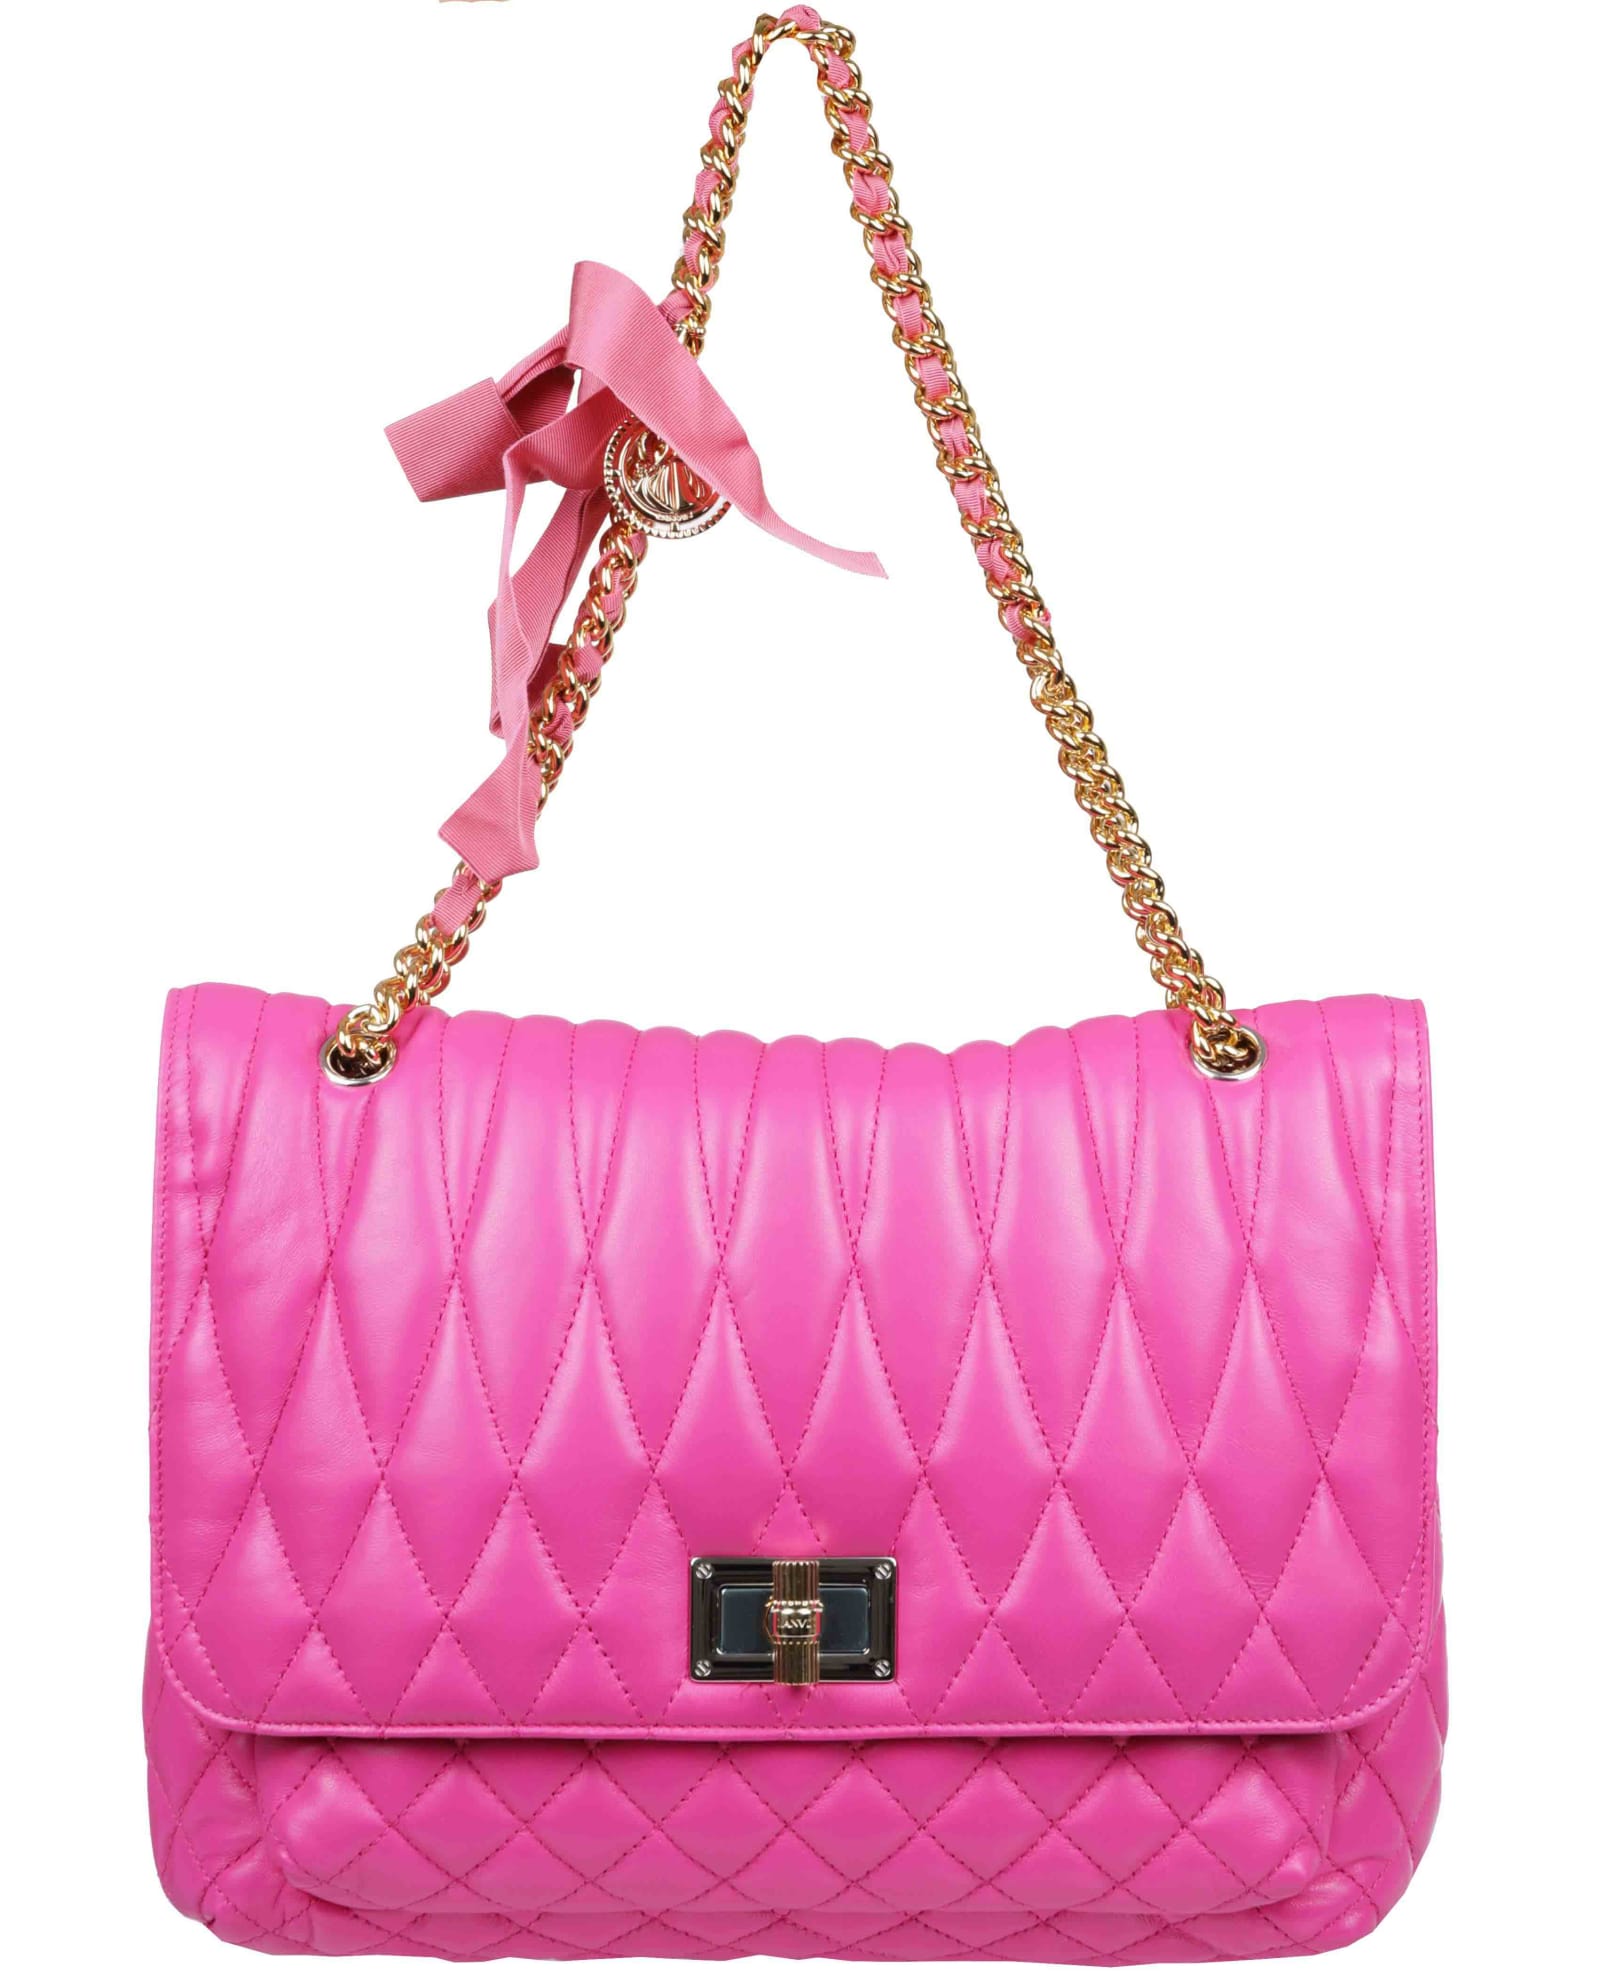 Lanvin fuchsia quilted leather shoulder bag